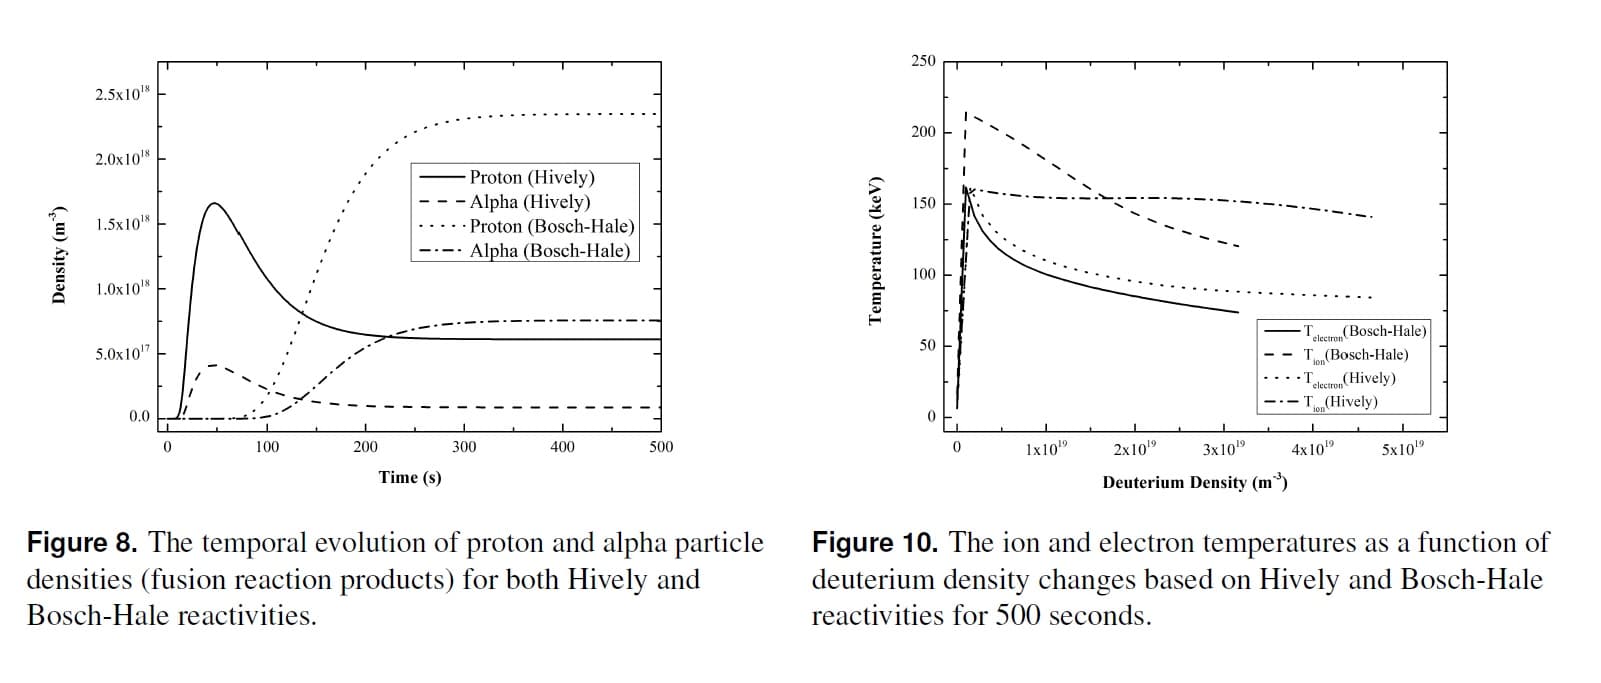 The influence of Hively and Bosch-Hale reactivities on hot ion mode in deuterium/helium-3 fuel